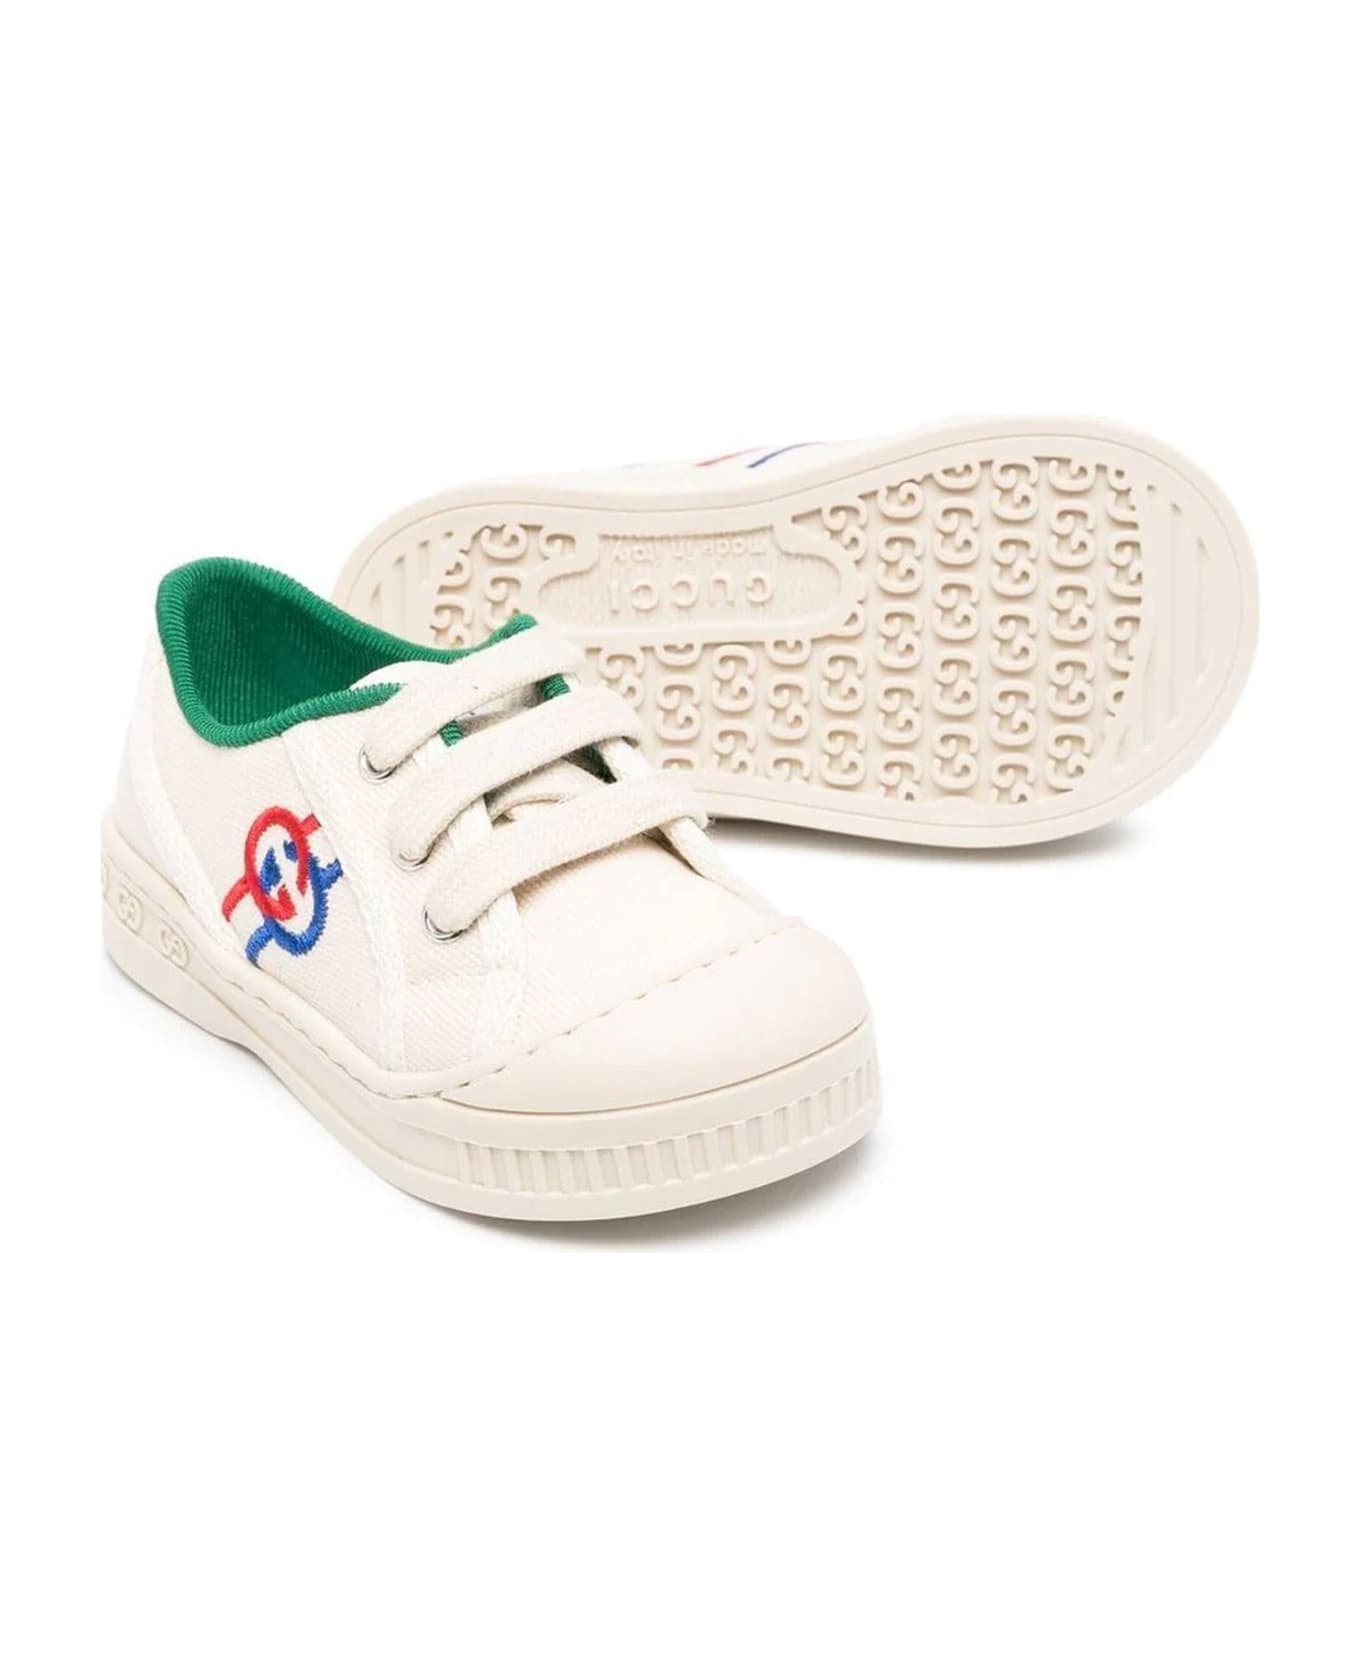 Gucci White Fabric Sneakers - Beige